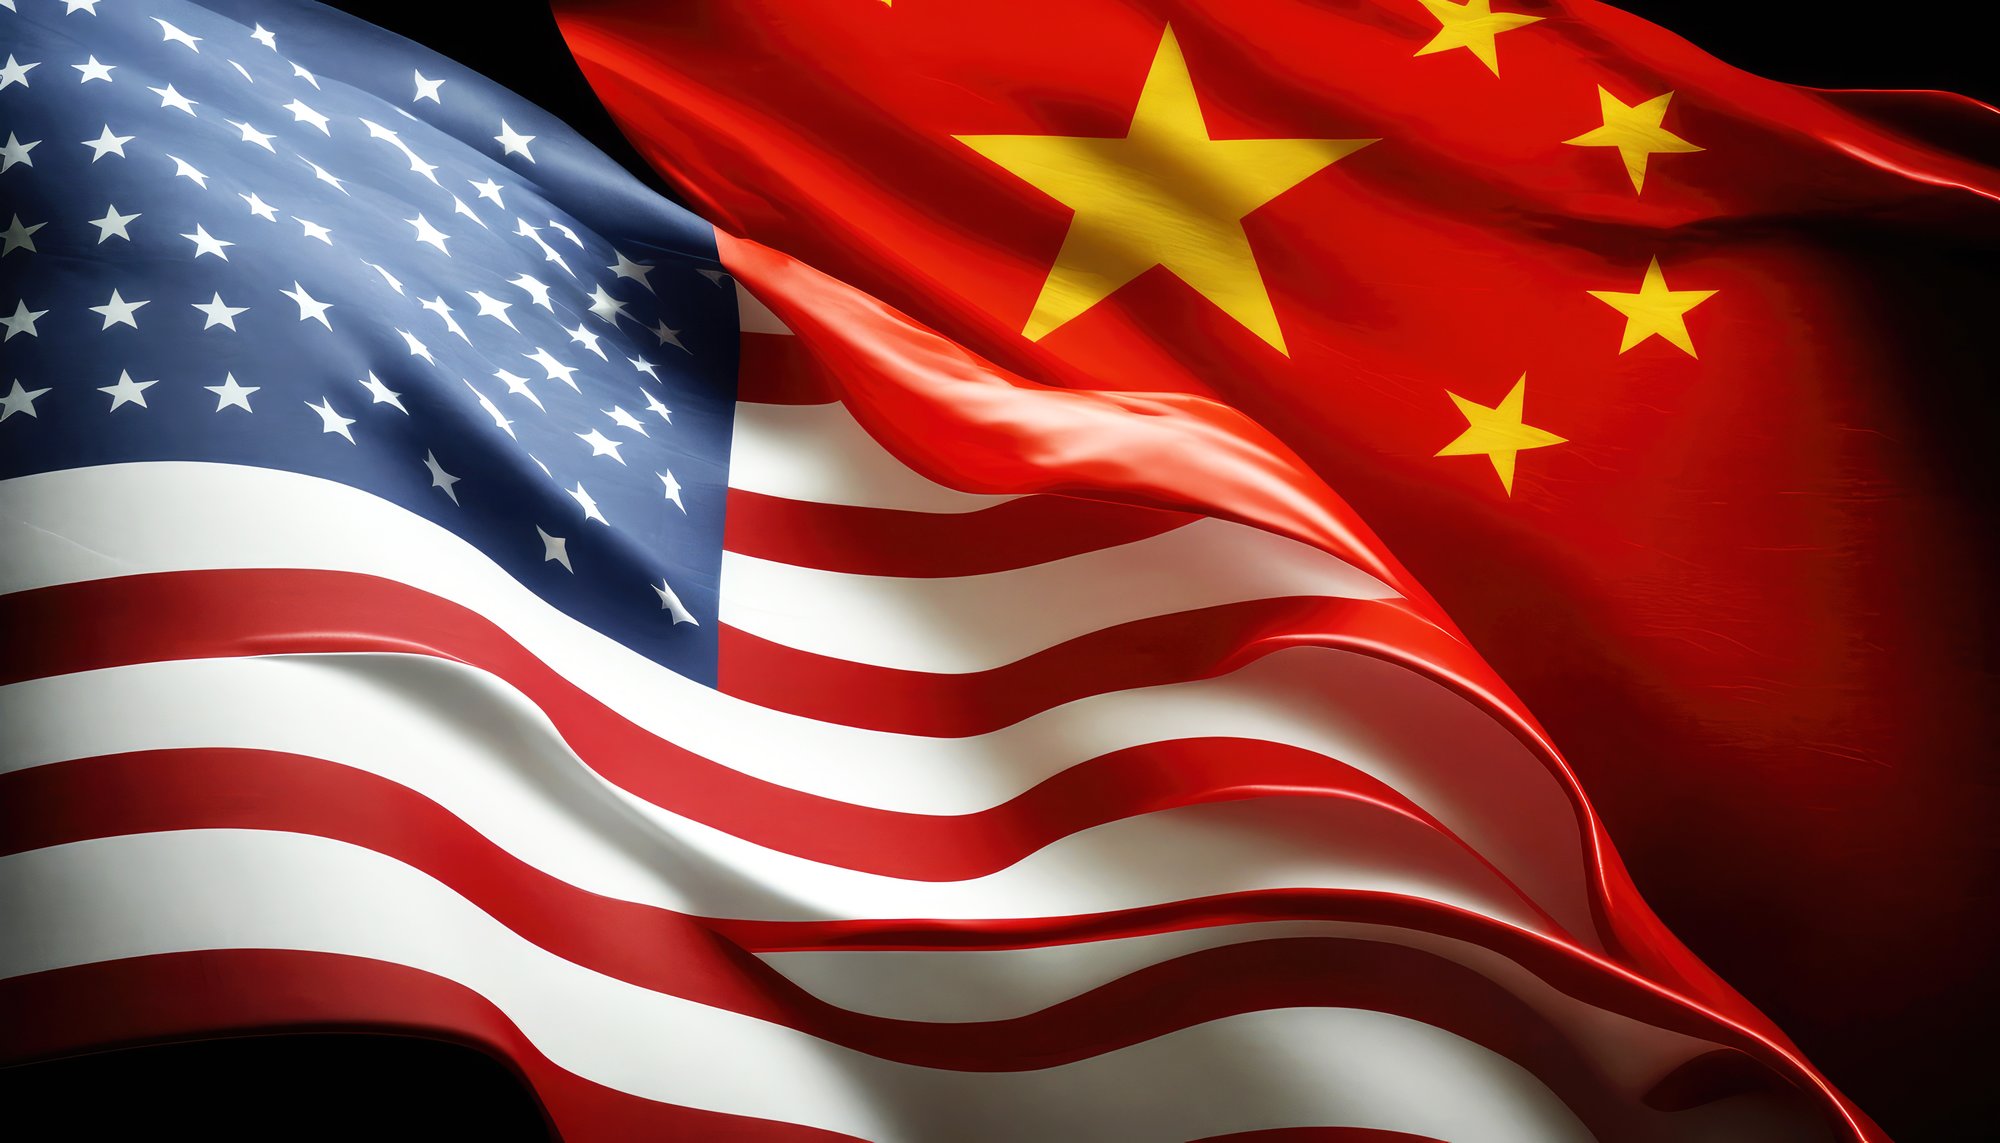 China flag on the left and an American flag on the right